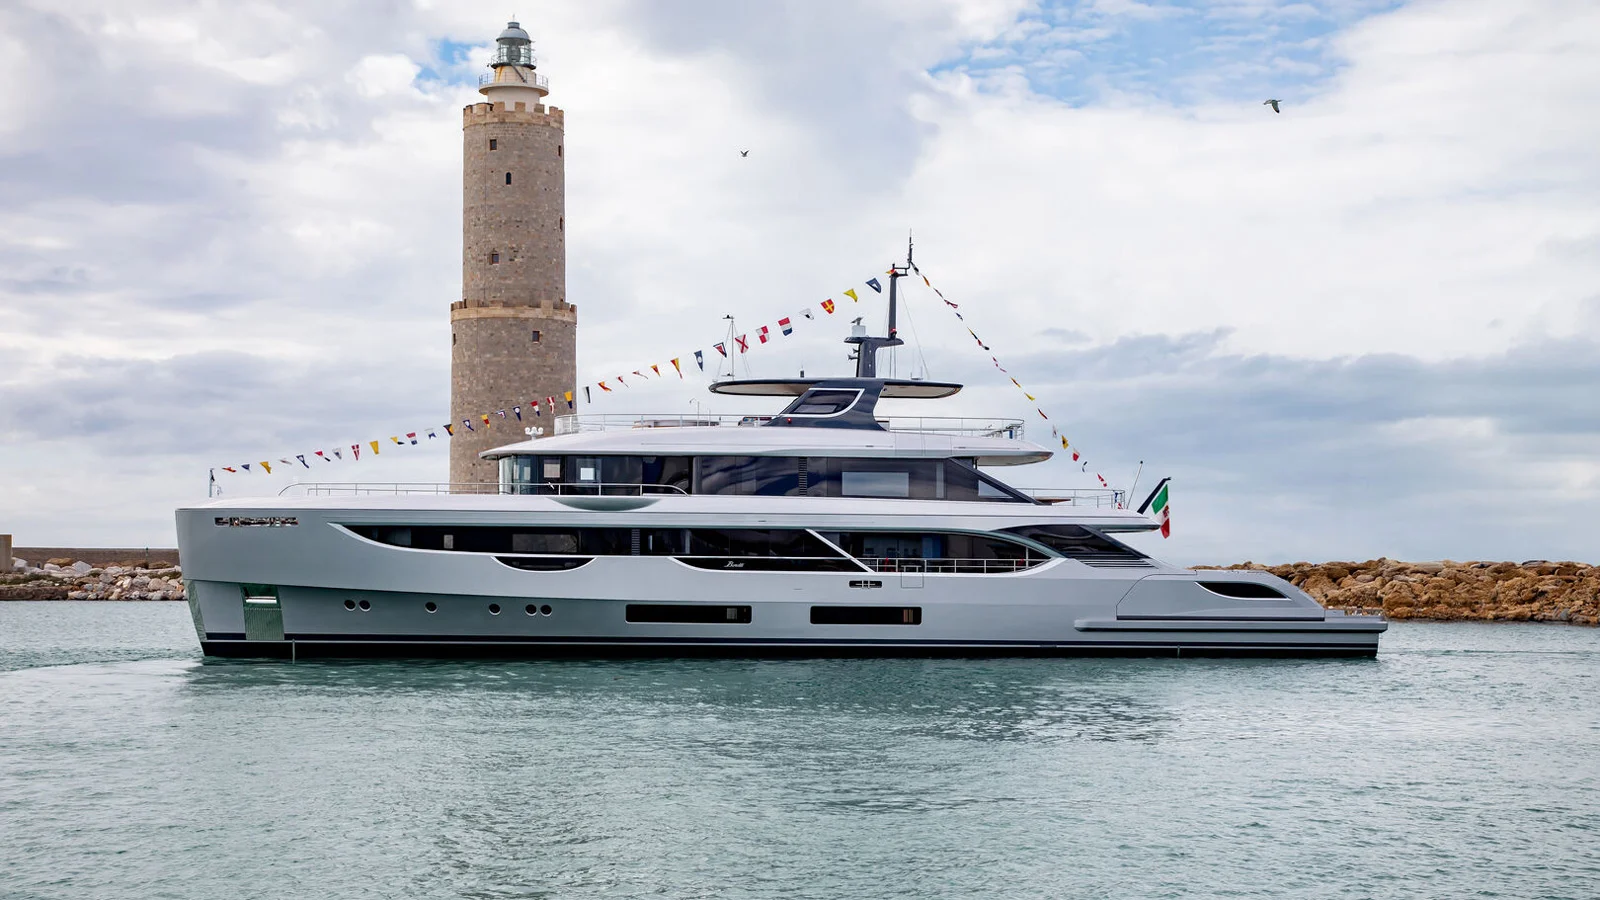 Benetti has launched Cosmico superyacht at its shipyard in Livorno